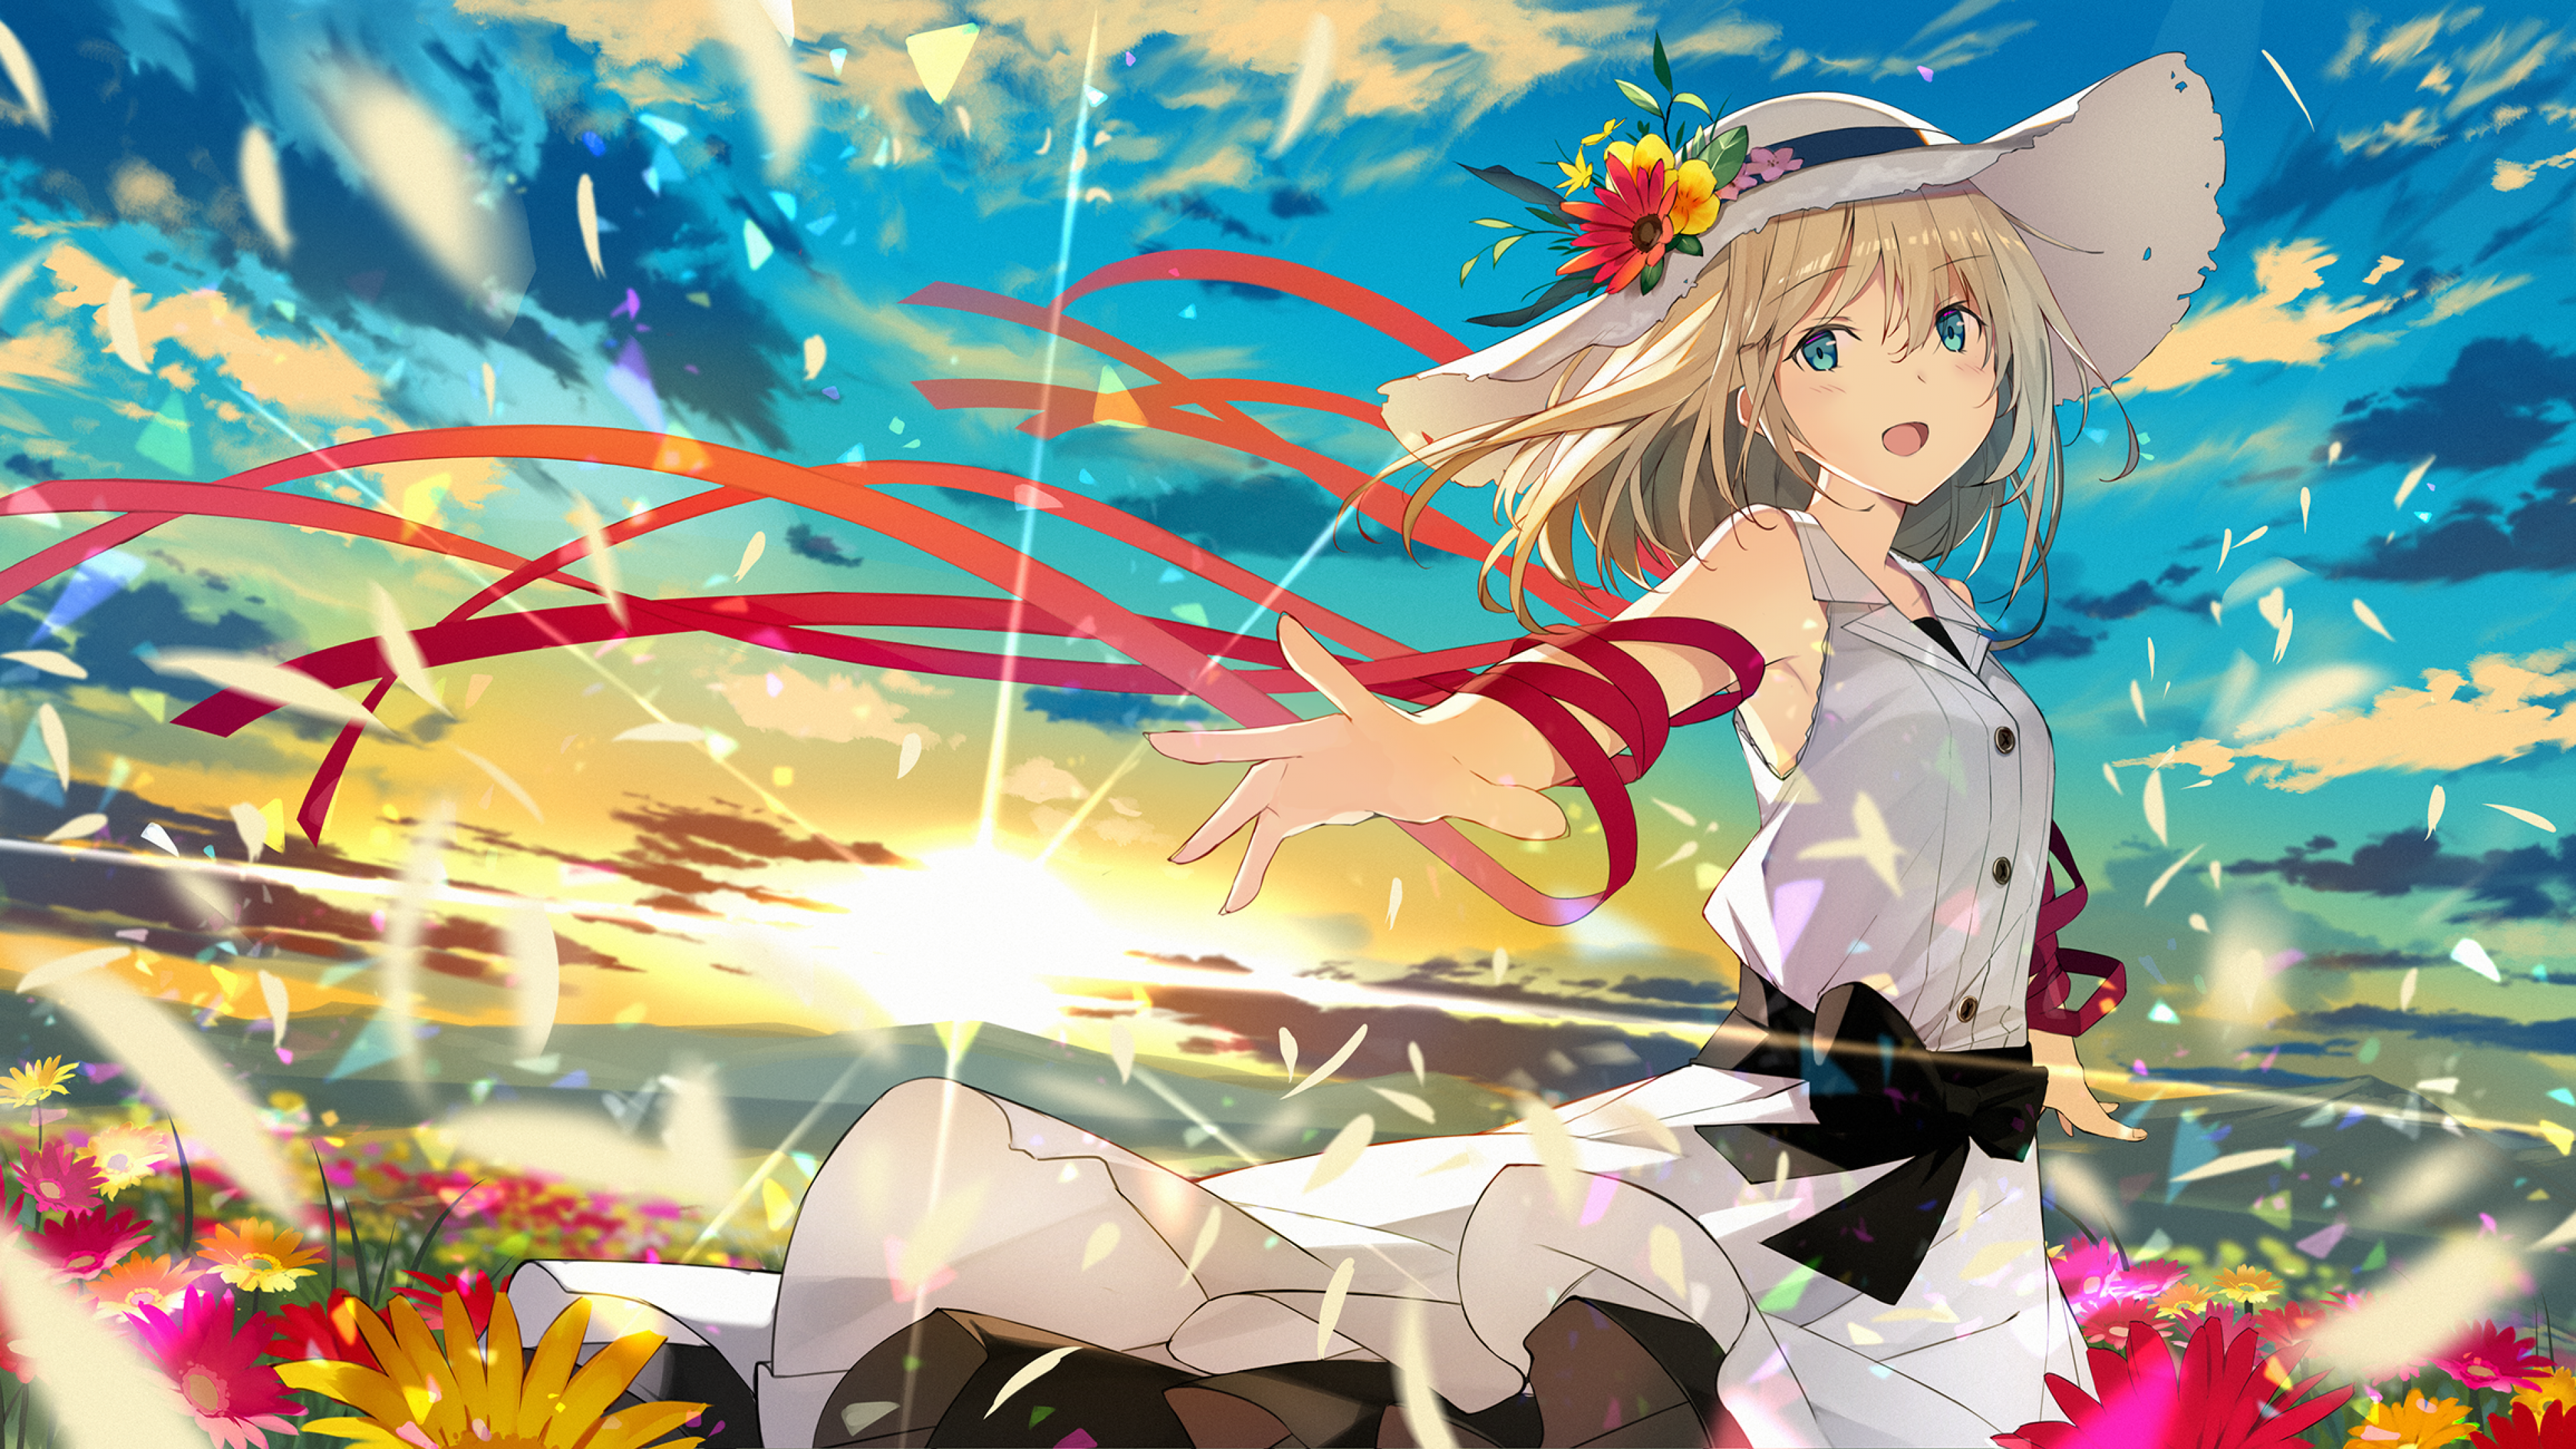 Download 3840x2160 Anime Girl, Colorful, Sunshine, Summer, Clouds